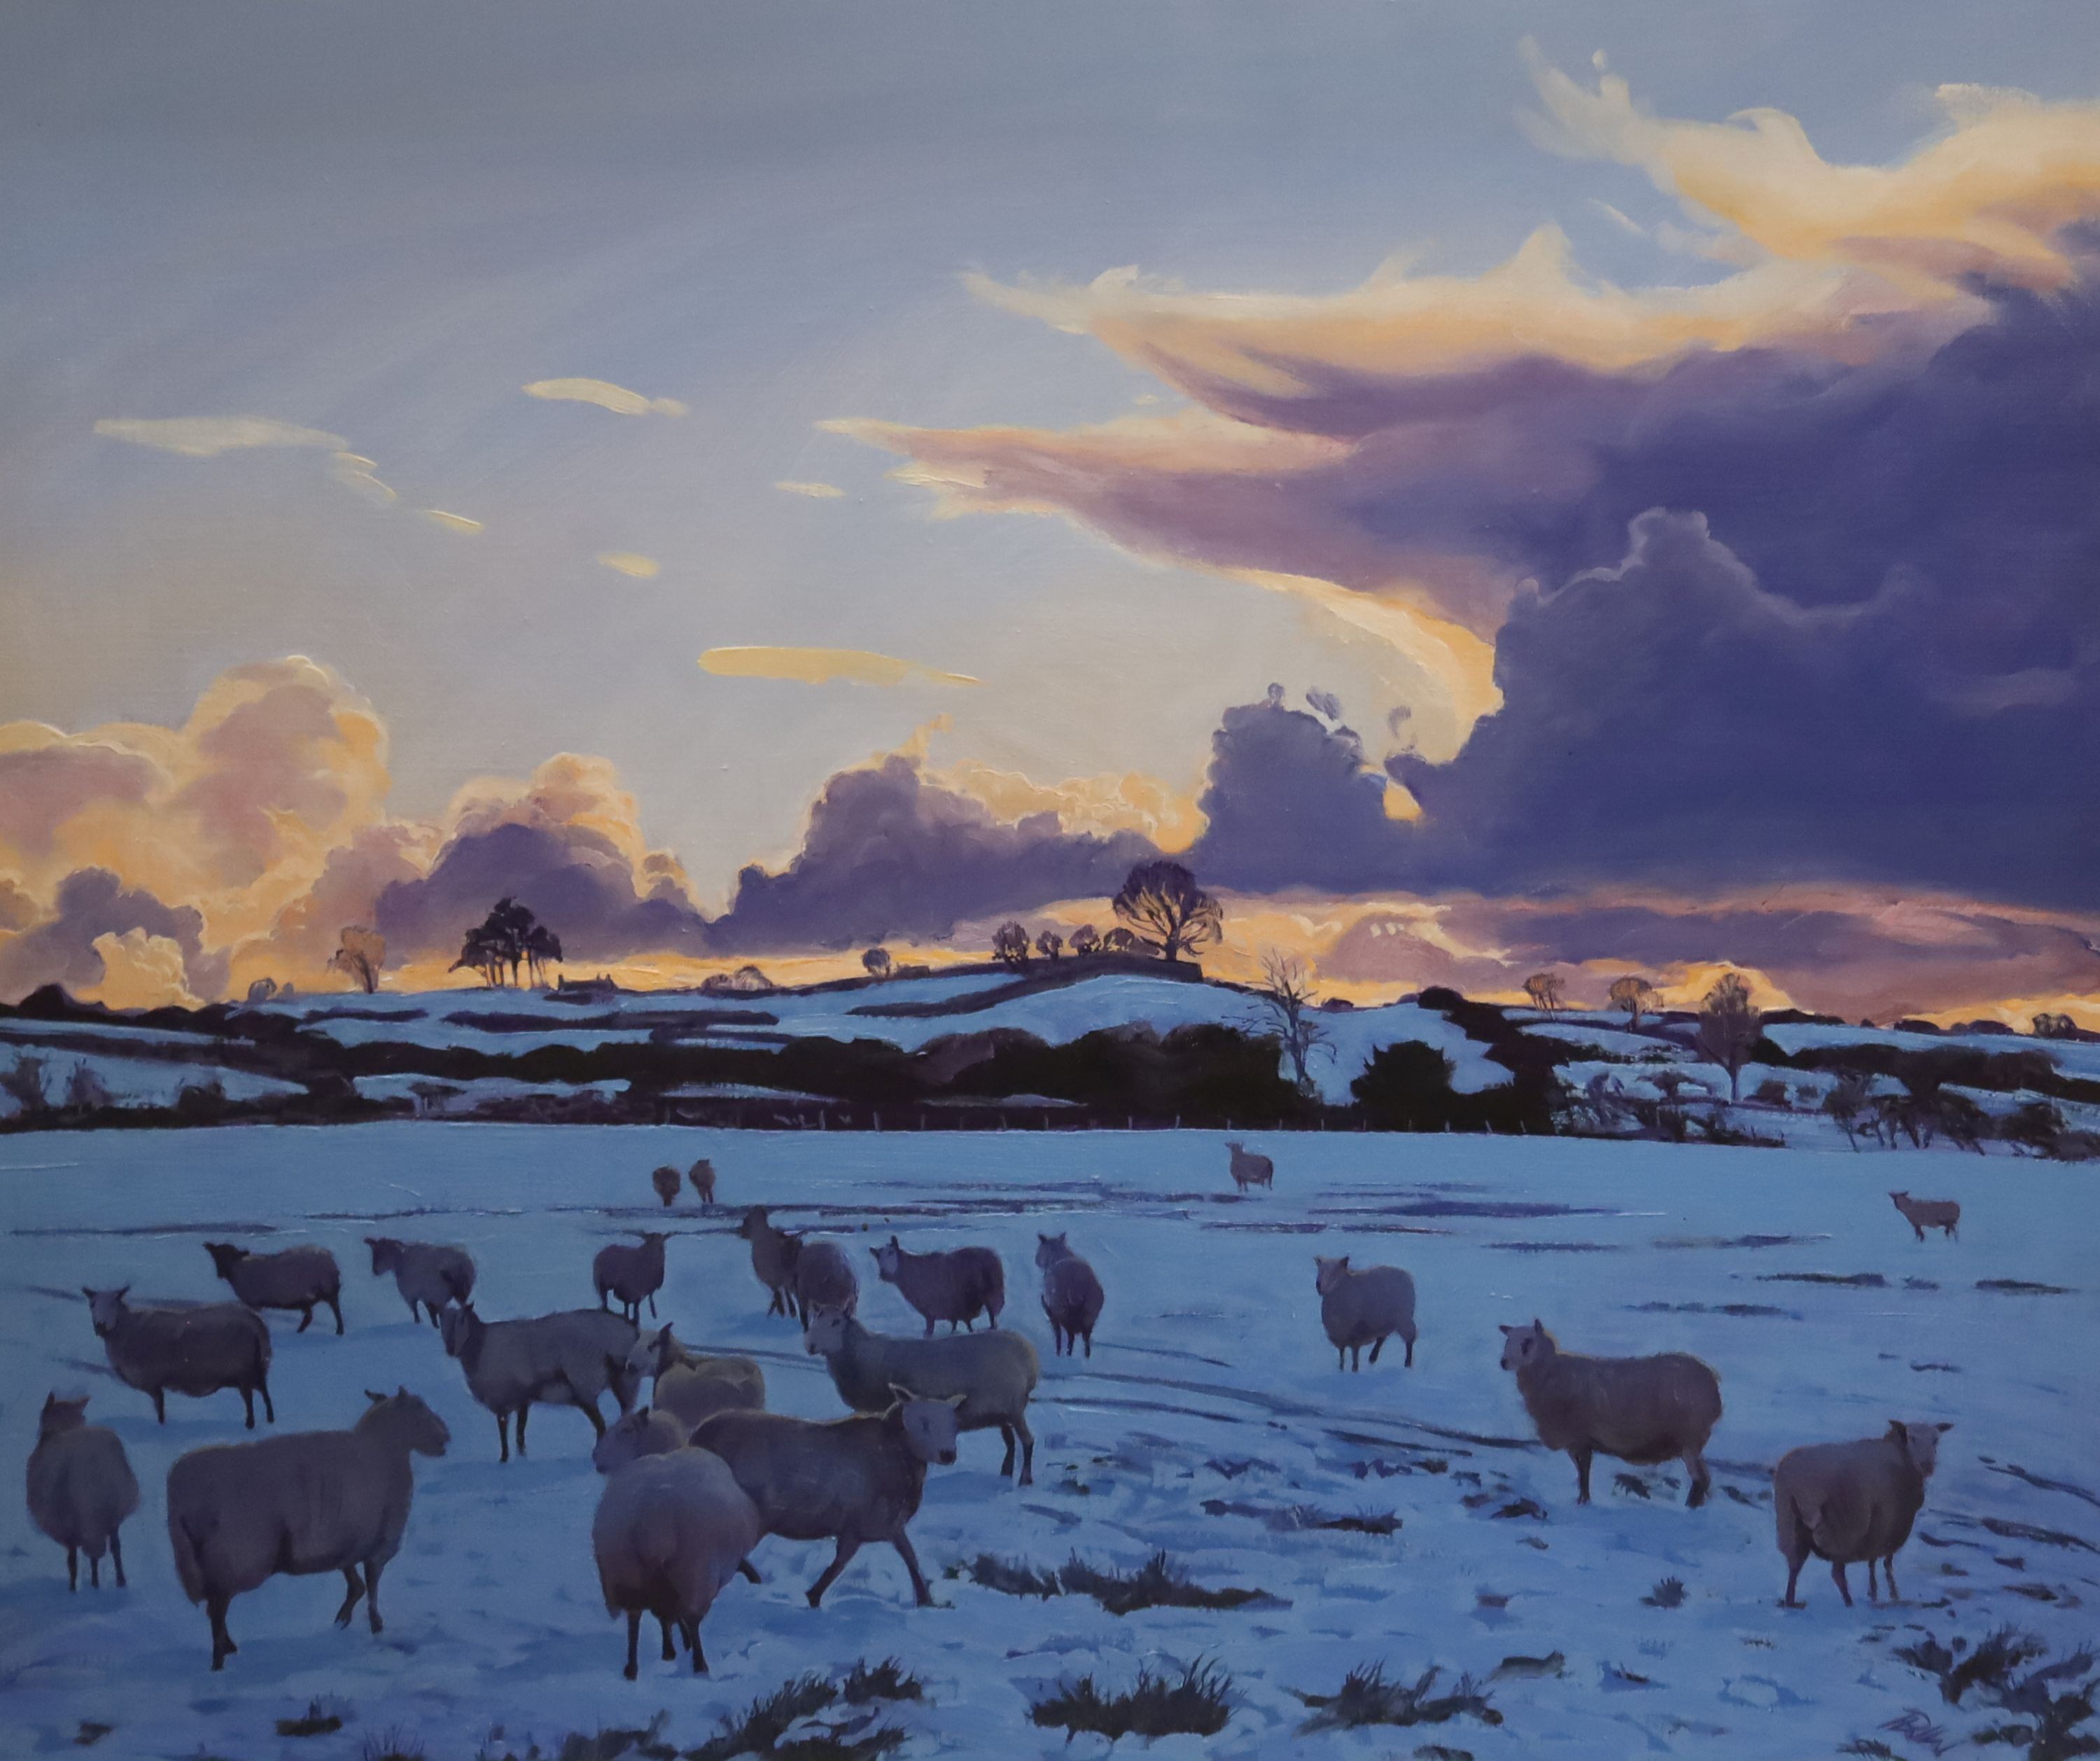 Peter Winstanley, oil on linen, 'Penmynede: Ghosts at Winter Dusk I', signed and inscribed verso, 60 x 70cm